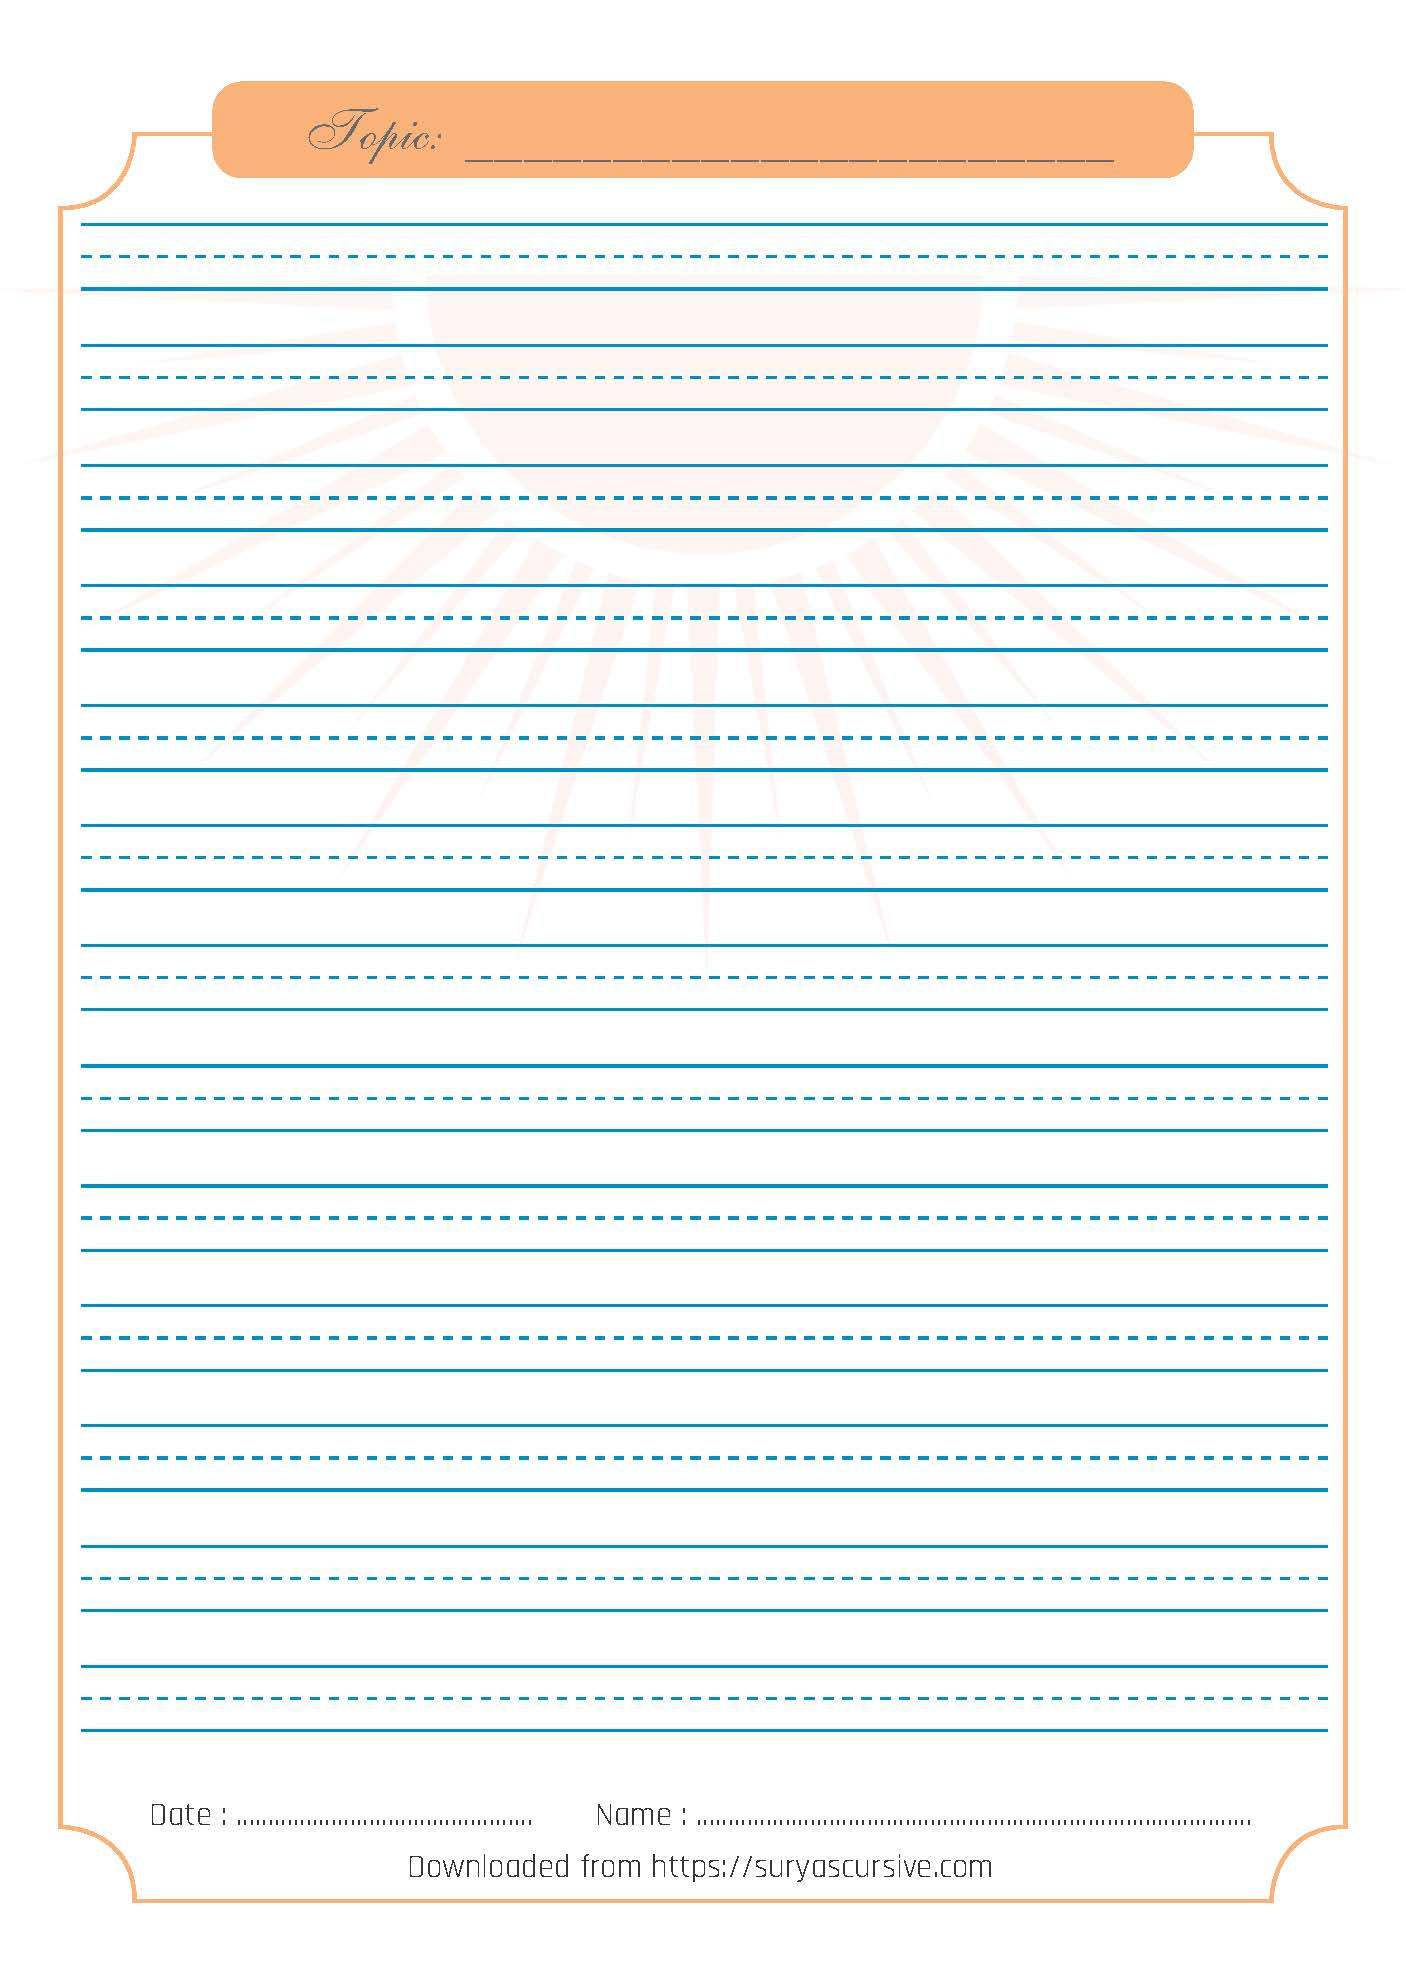 Blank Handwriting Worksheet 3 lined For Cursive Writing Practice 